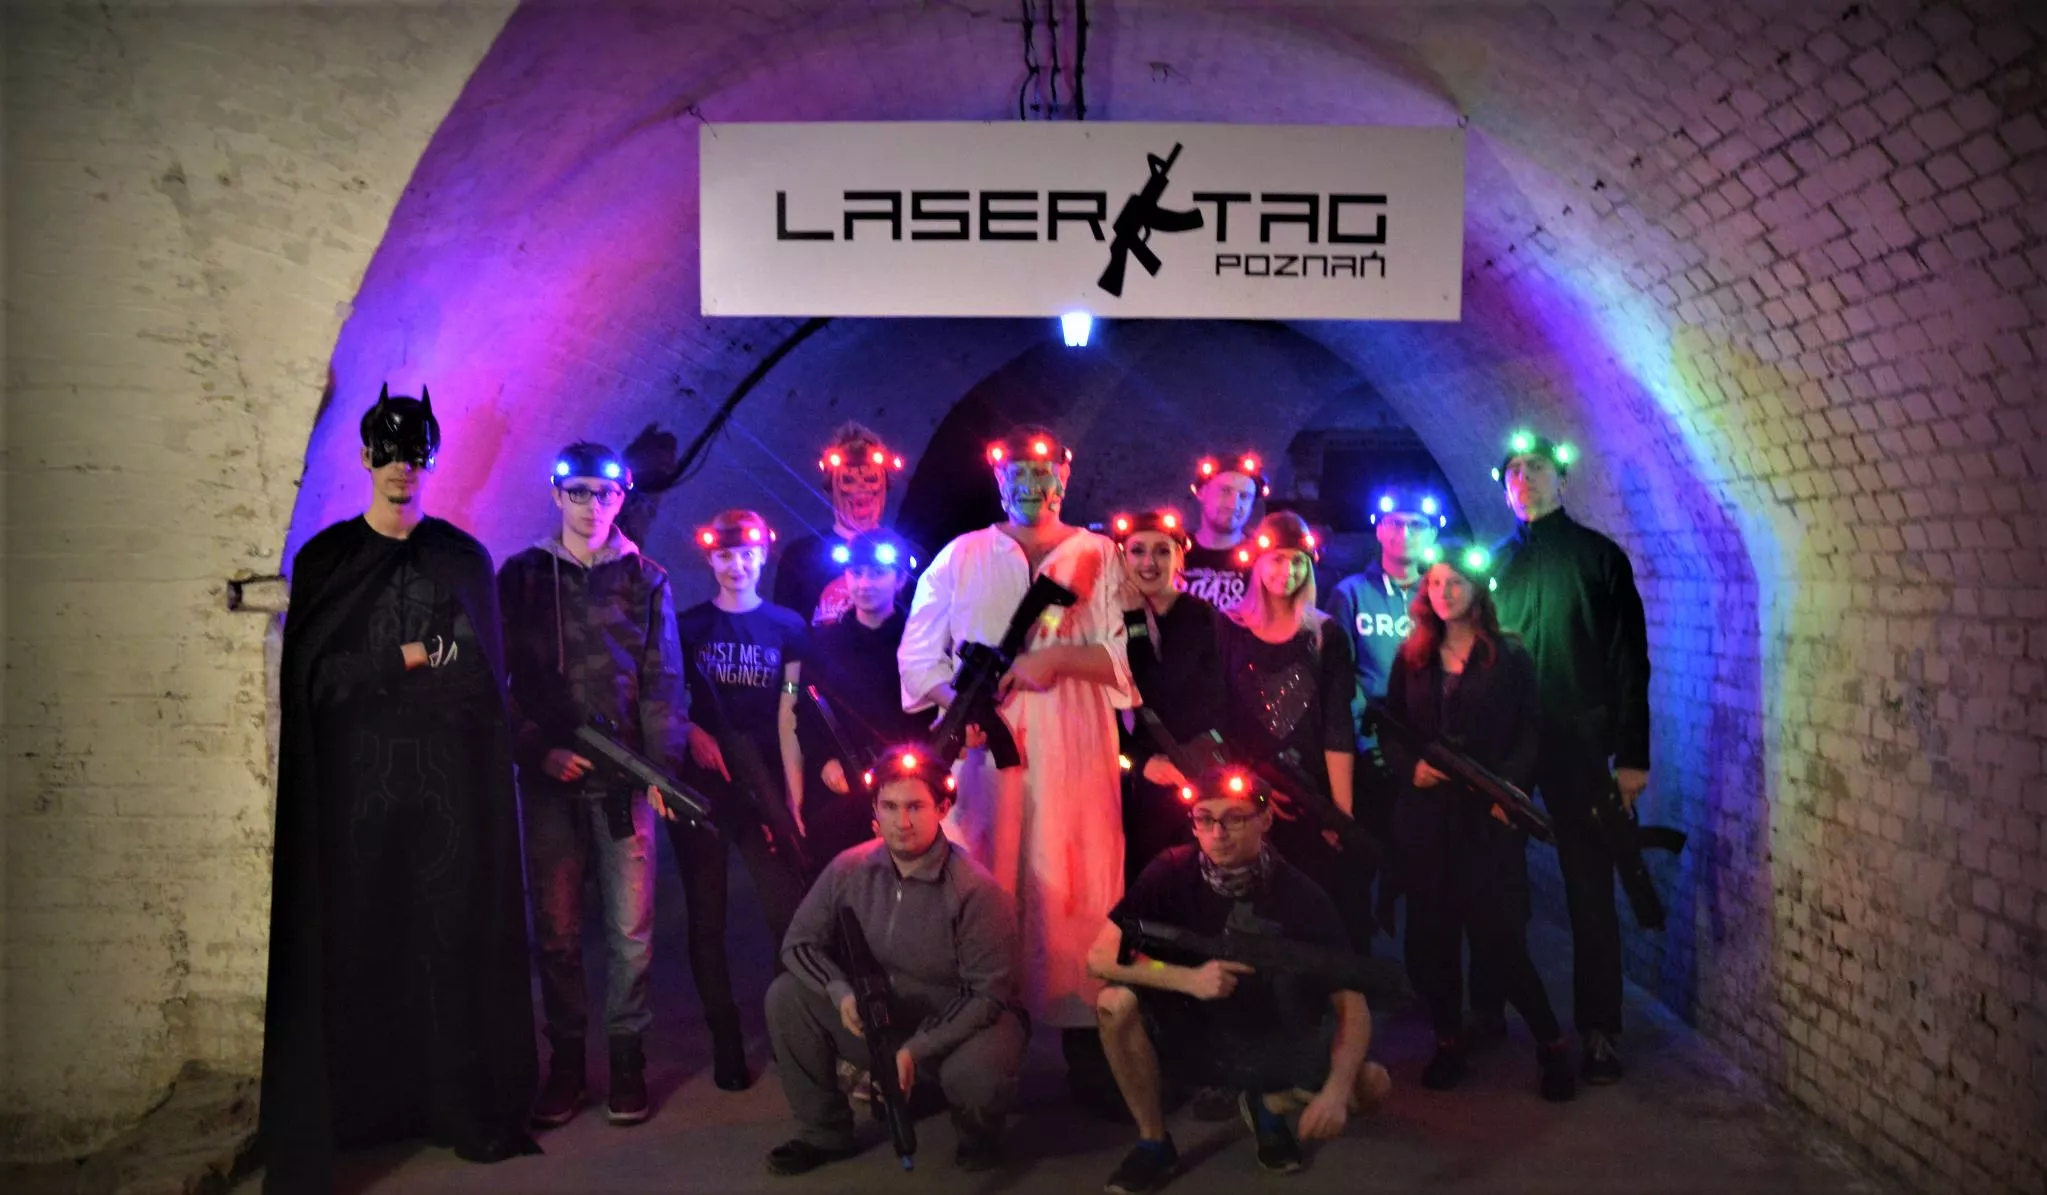 Laser Tag Poznan in Poland, Europe | Laser Tag - Rated 4.6